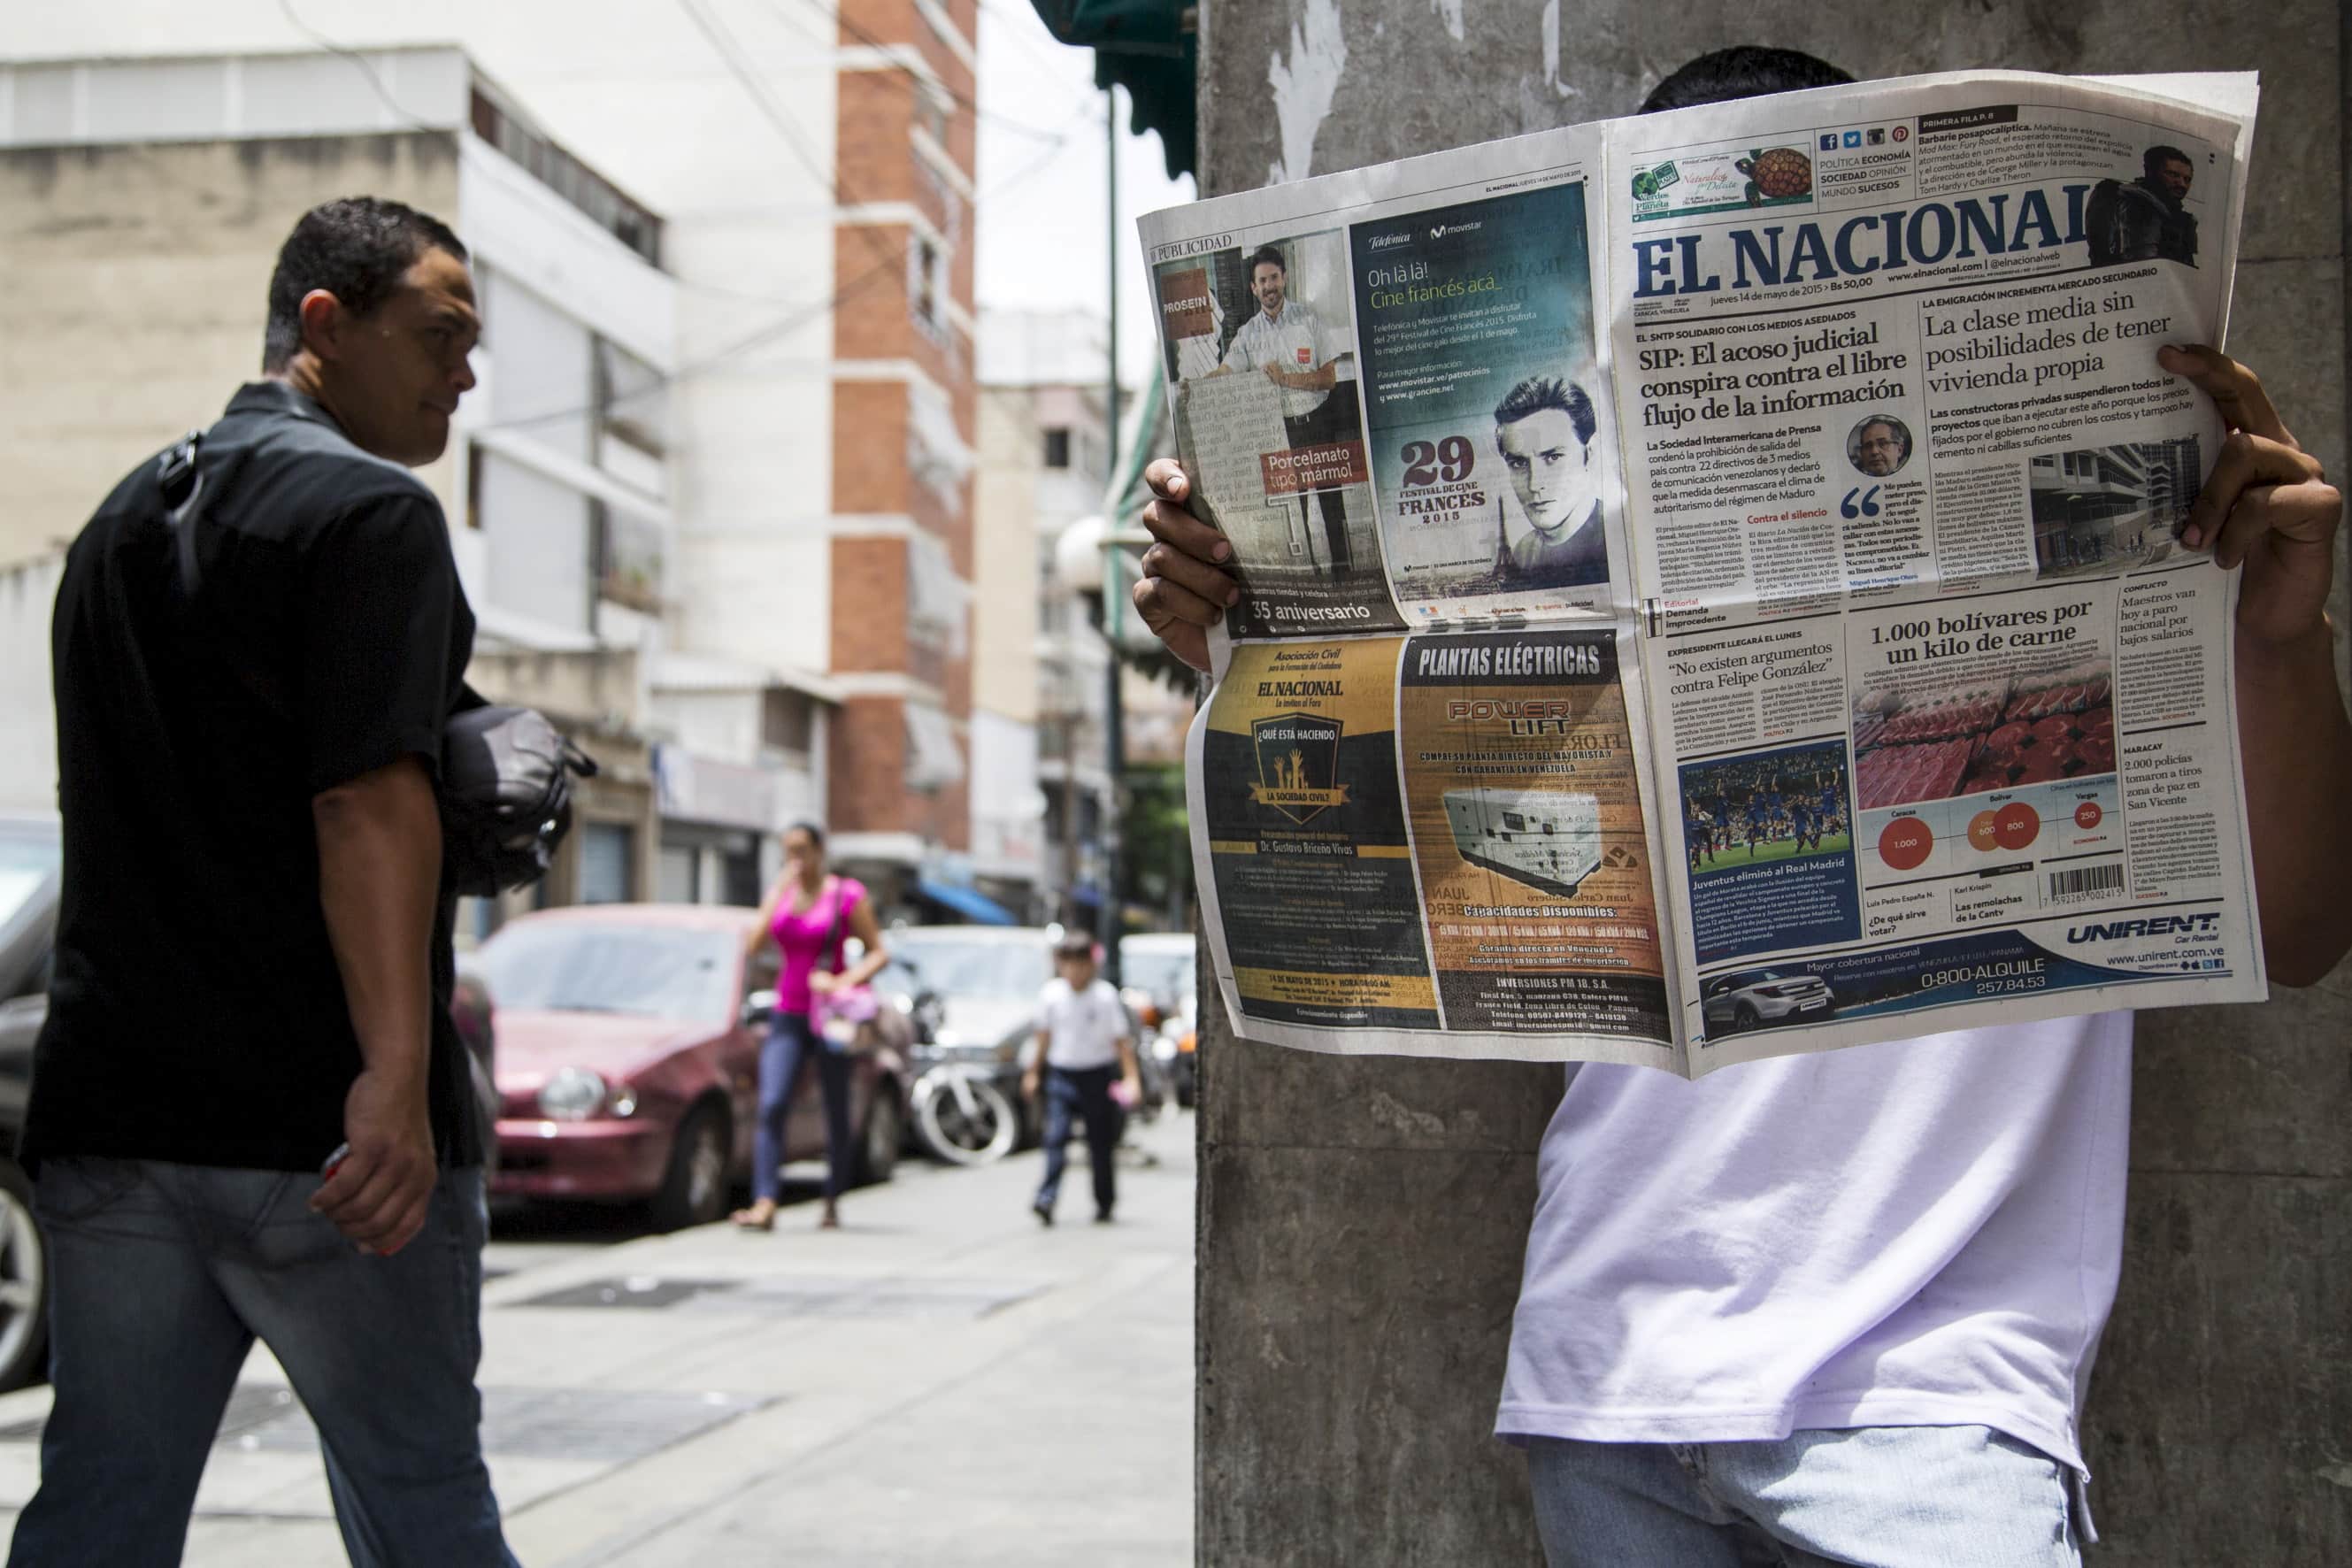 A man reads an "El Nacional" newspaper on a street in Caracas, 14 May 2015, REUTERS/Marco Bello